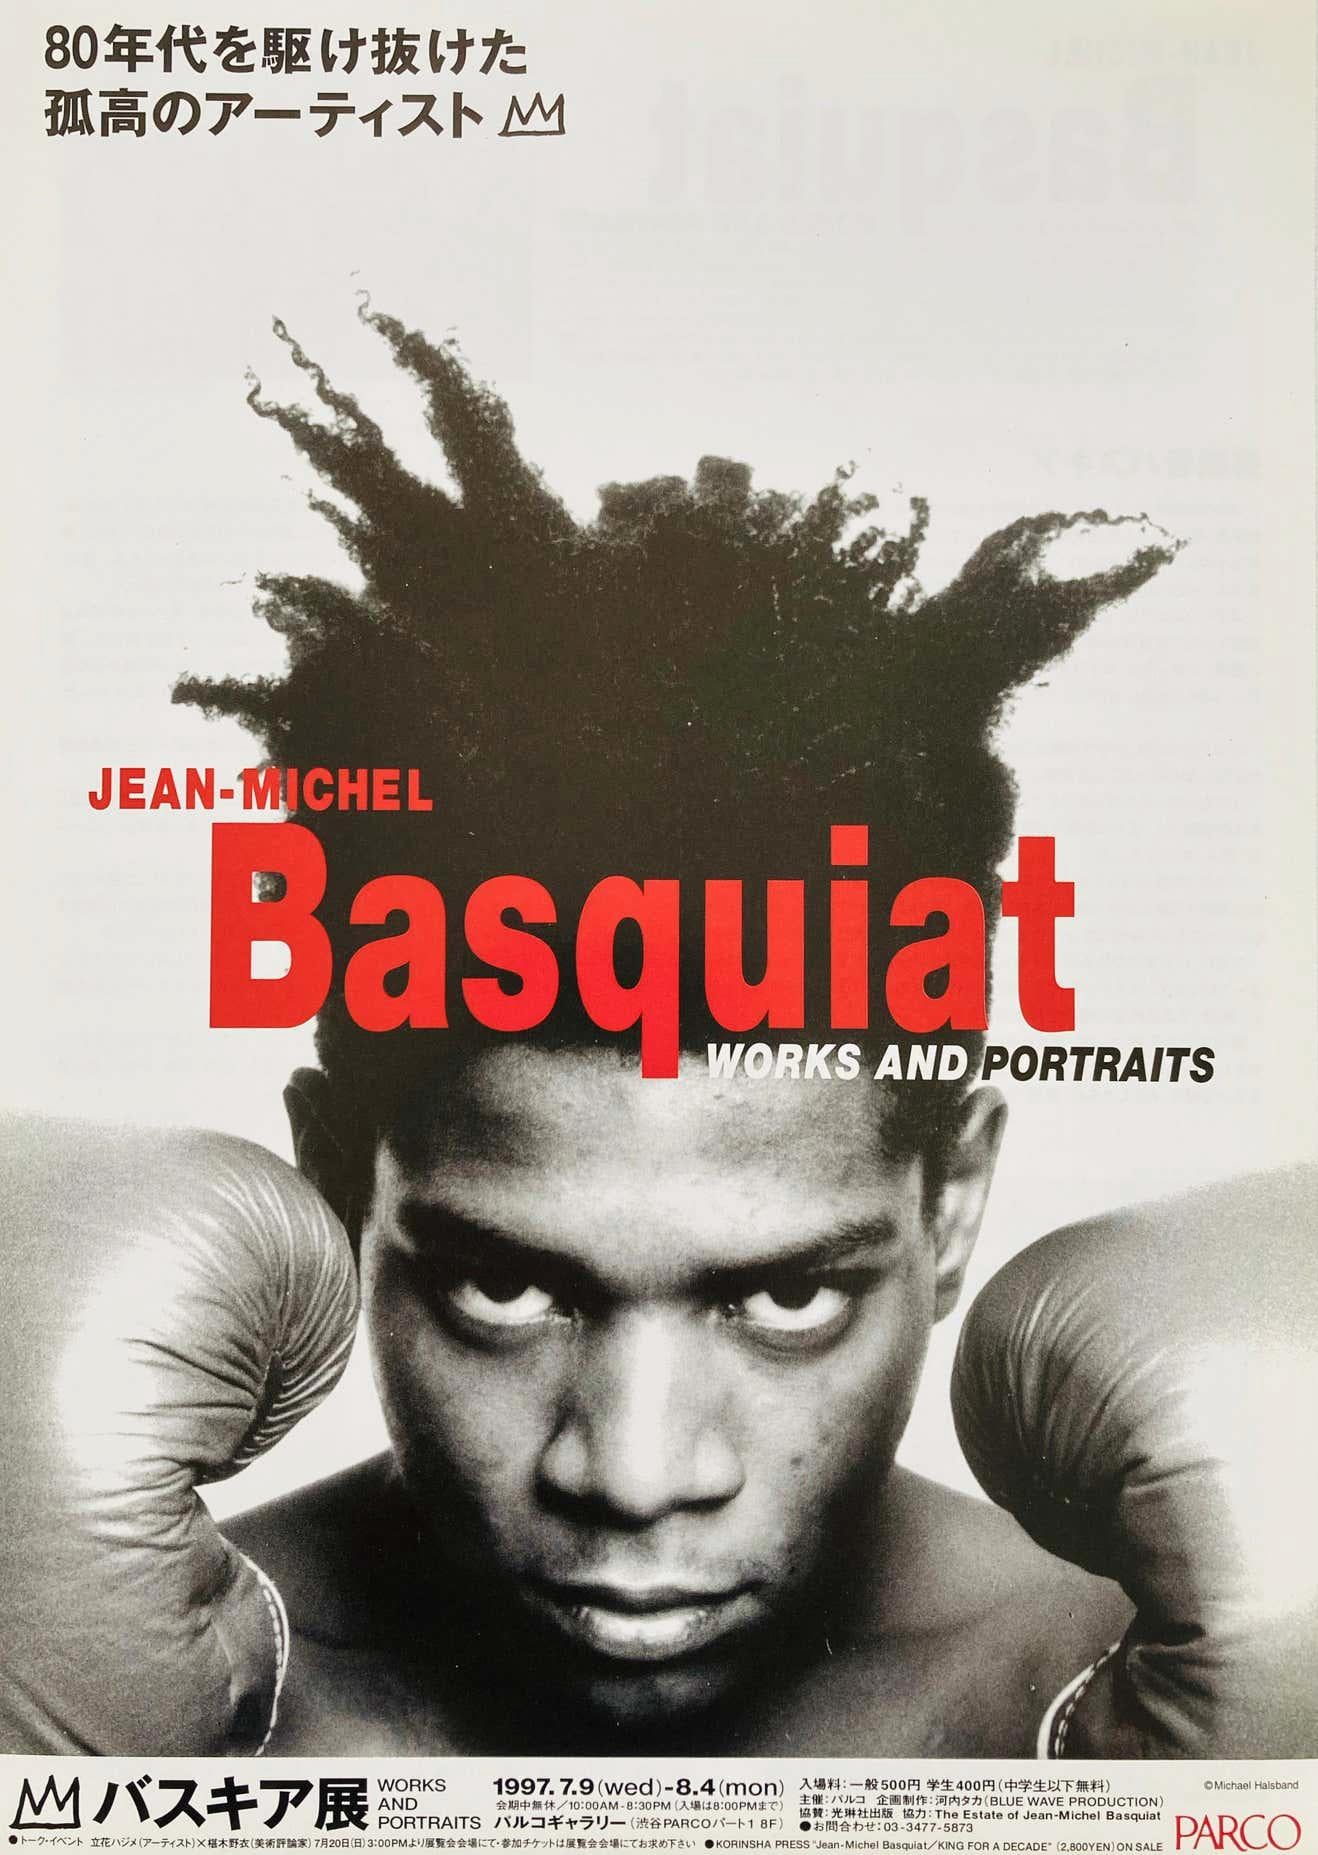 Basquiat Boxing Poster 1997 - Photograph by after Jean-Michel Basquiat